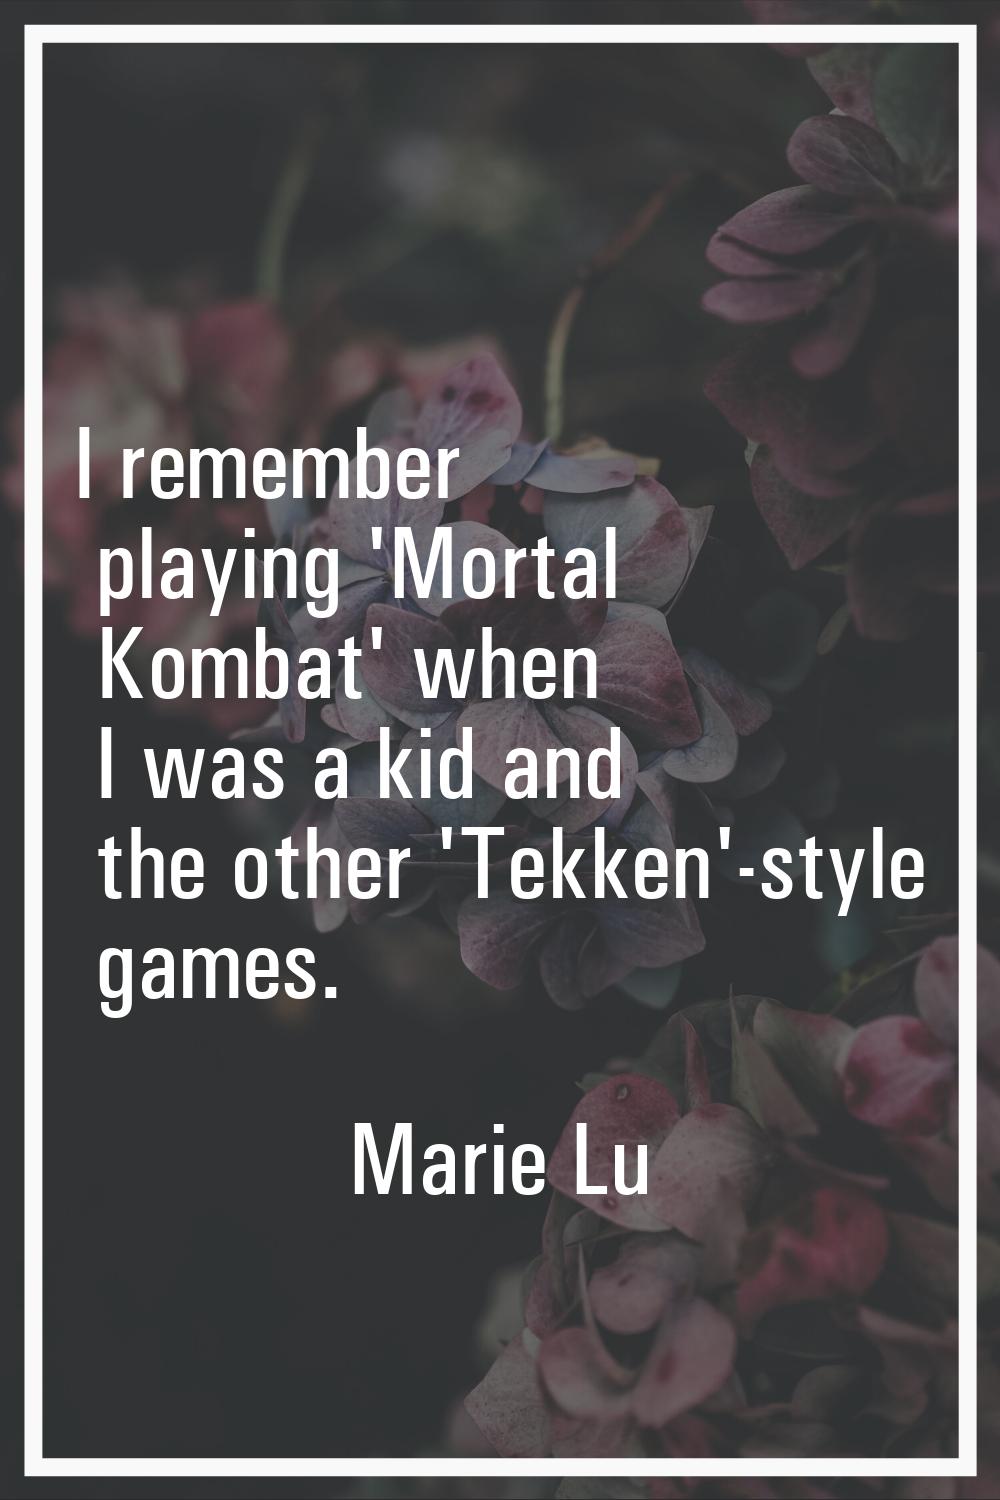 I remember playing 'Mortal Kombat' when I was a kid and the other 'Tekken'-style games.